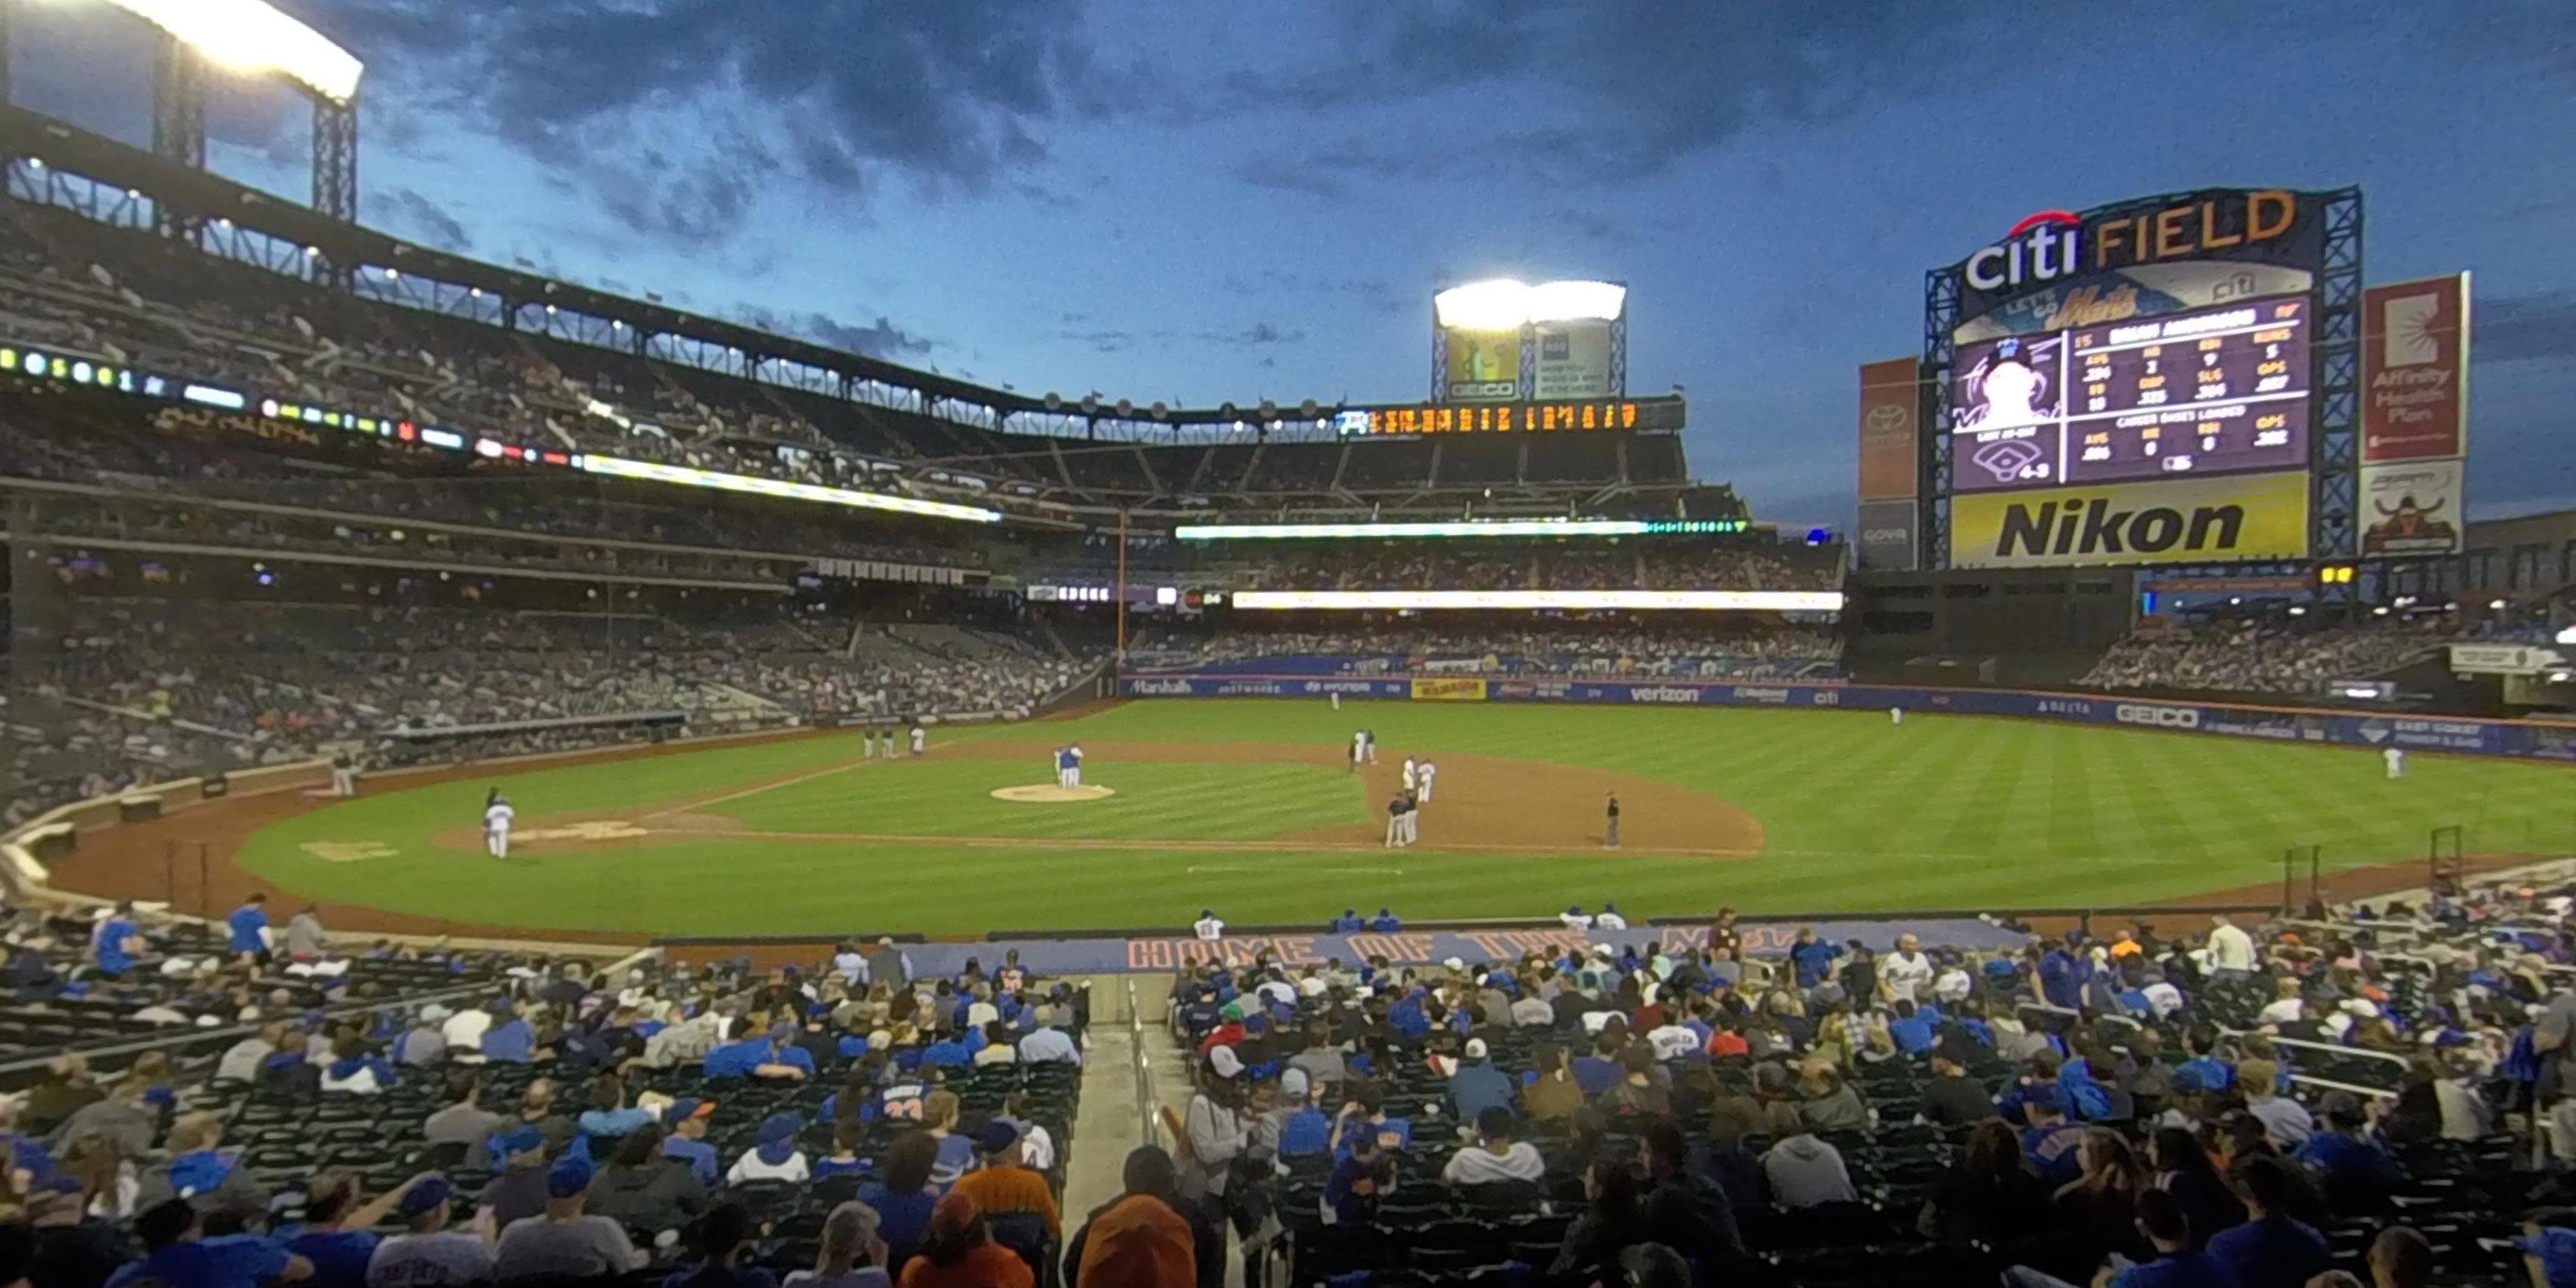 section 113 panoramic seat view  - citi field